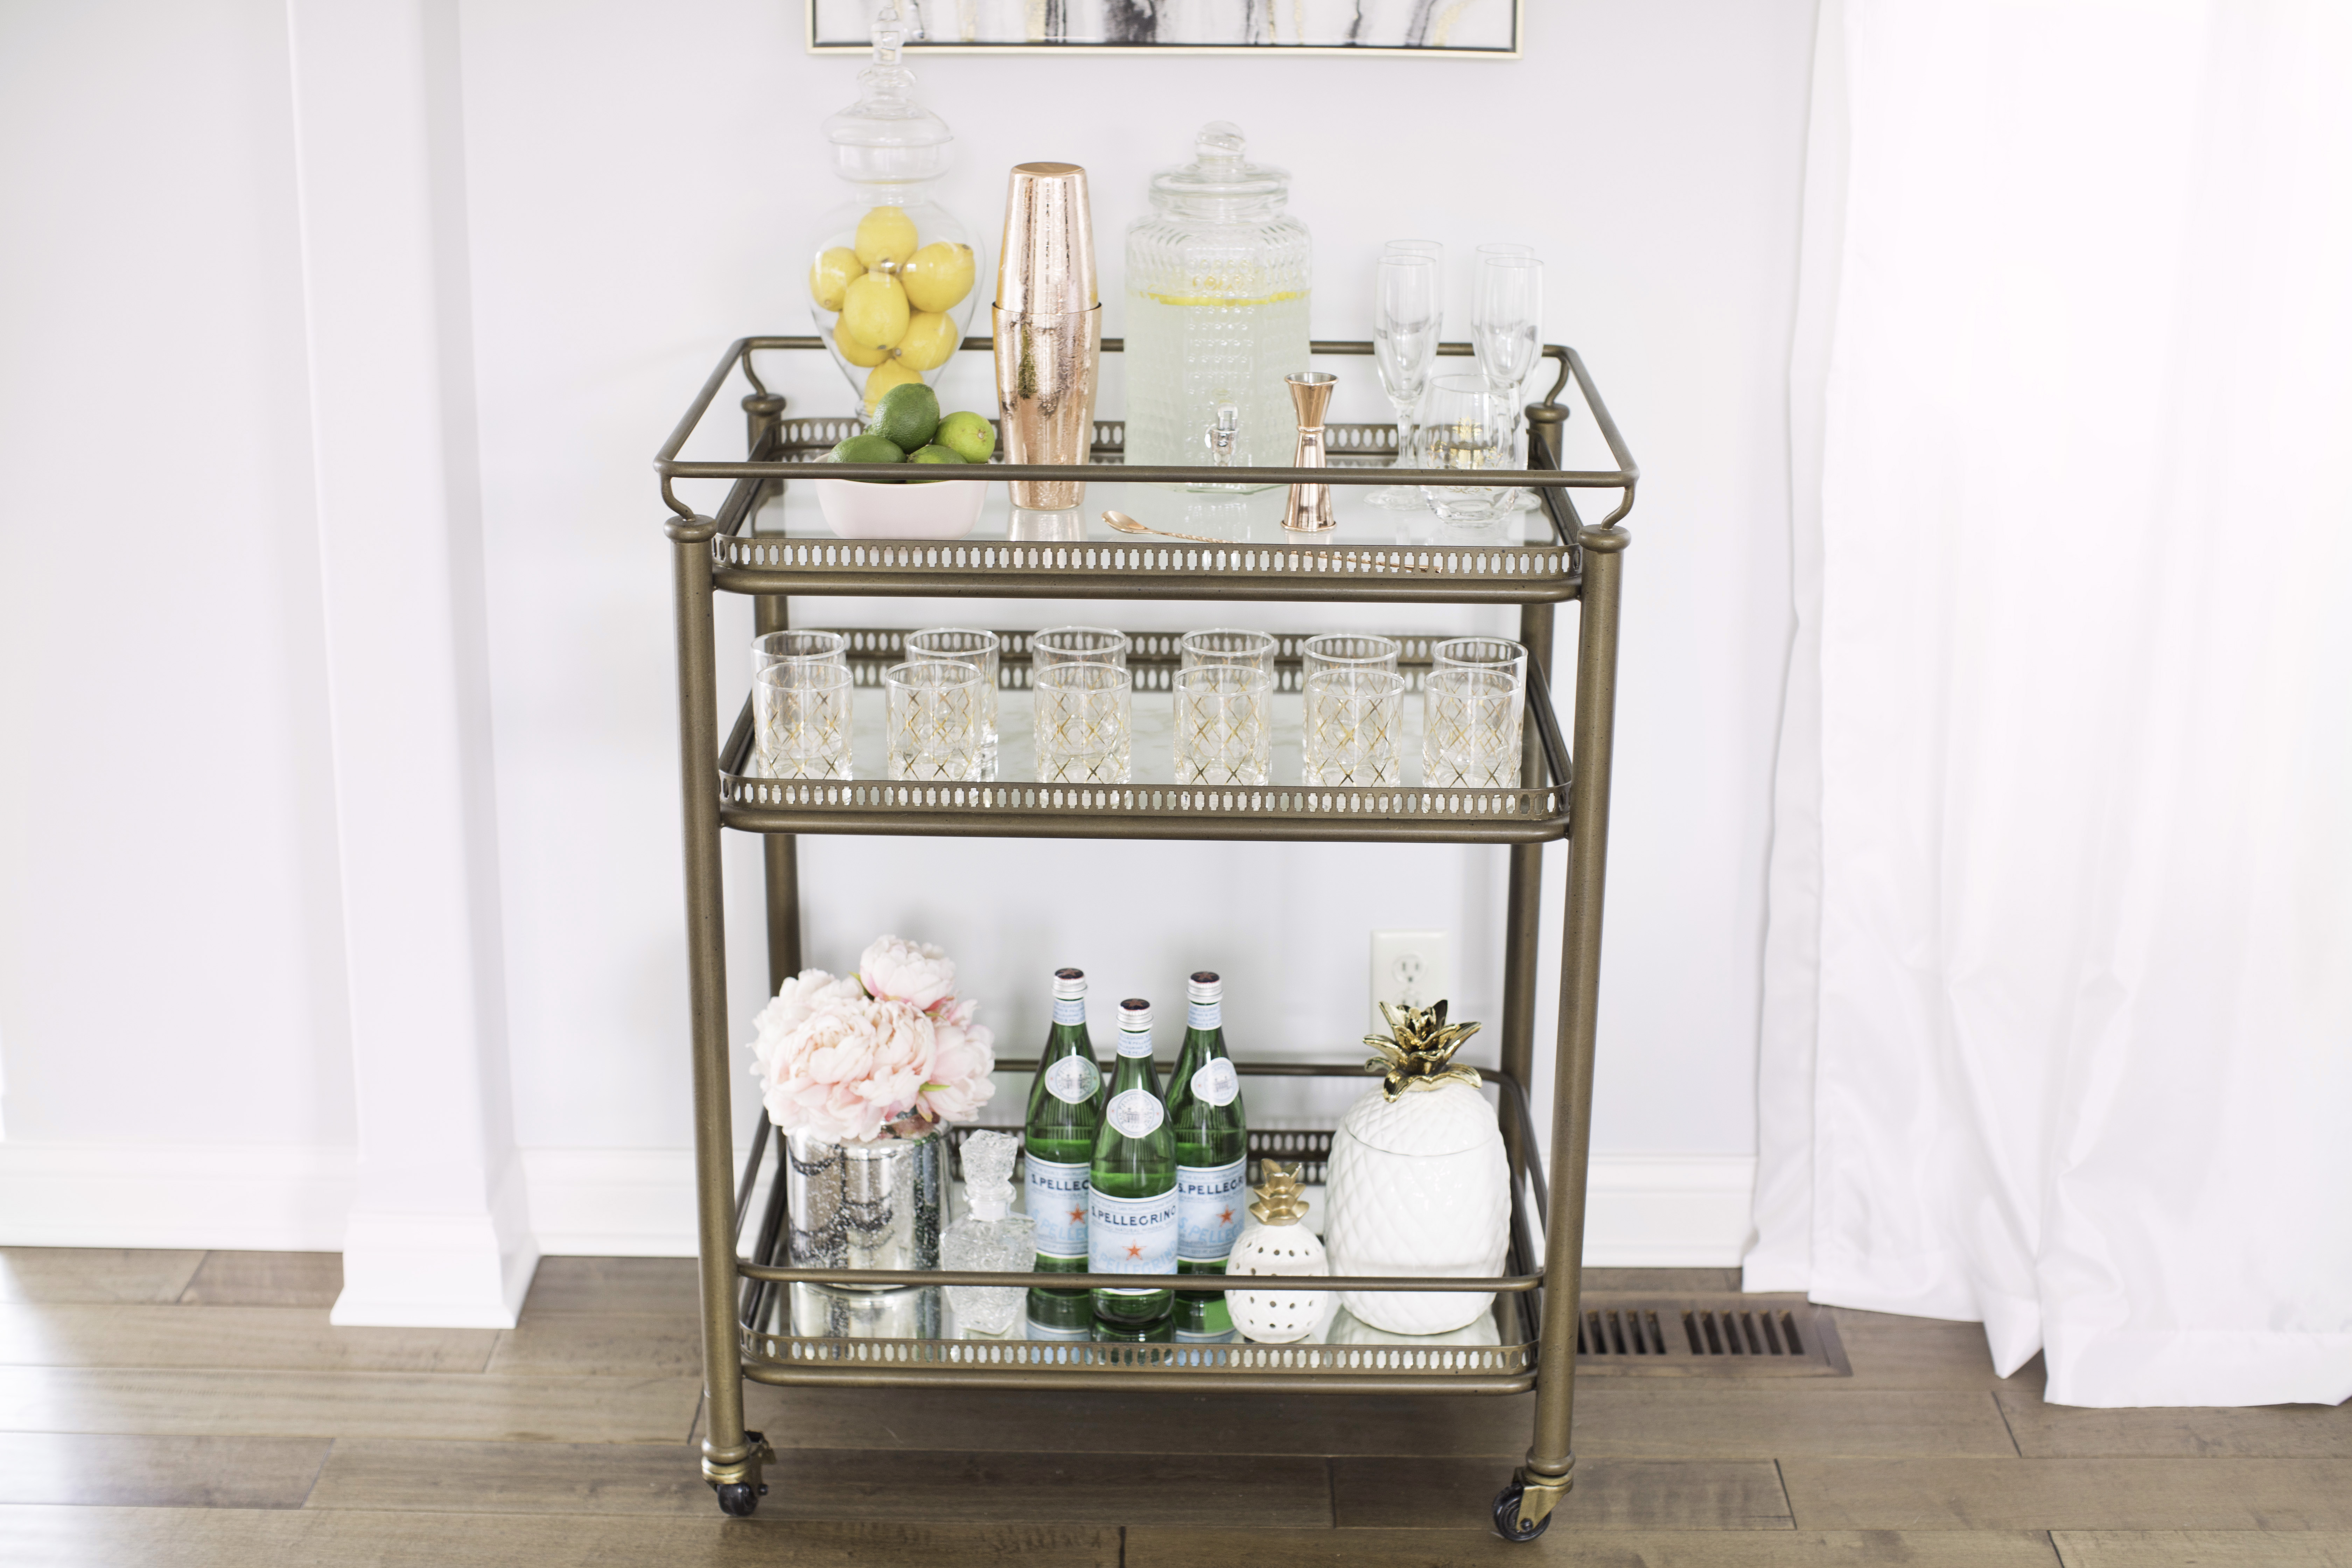 how to style a bar cart from soft surroundings, interior design, bar cart design, bar cart styling idea